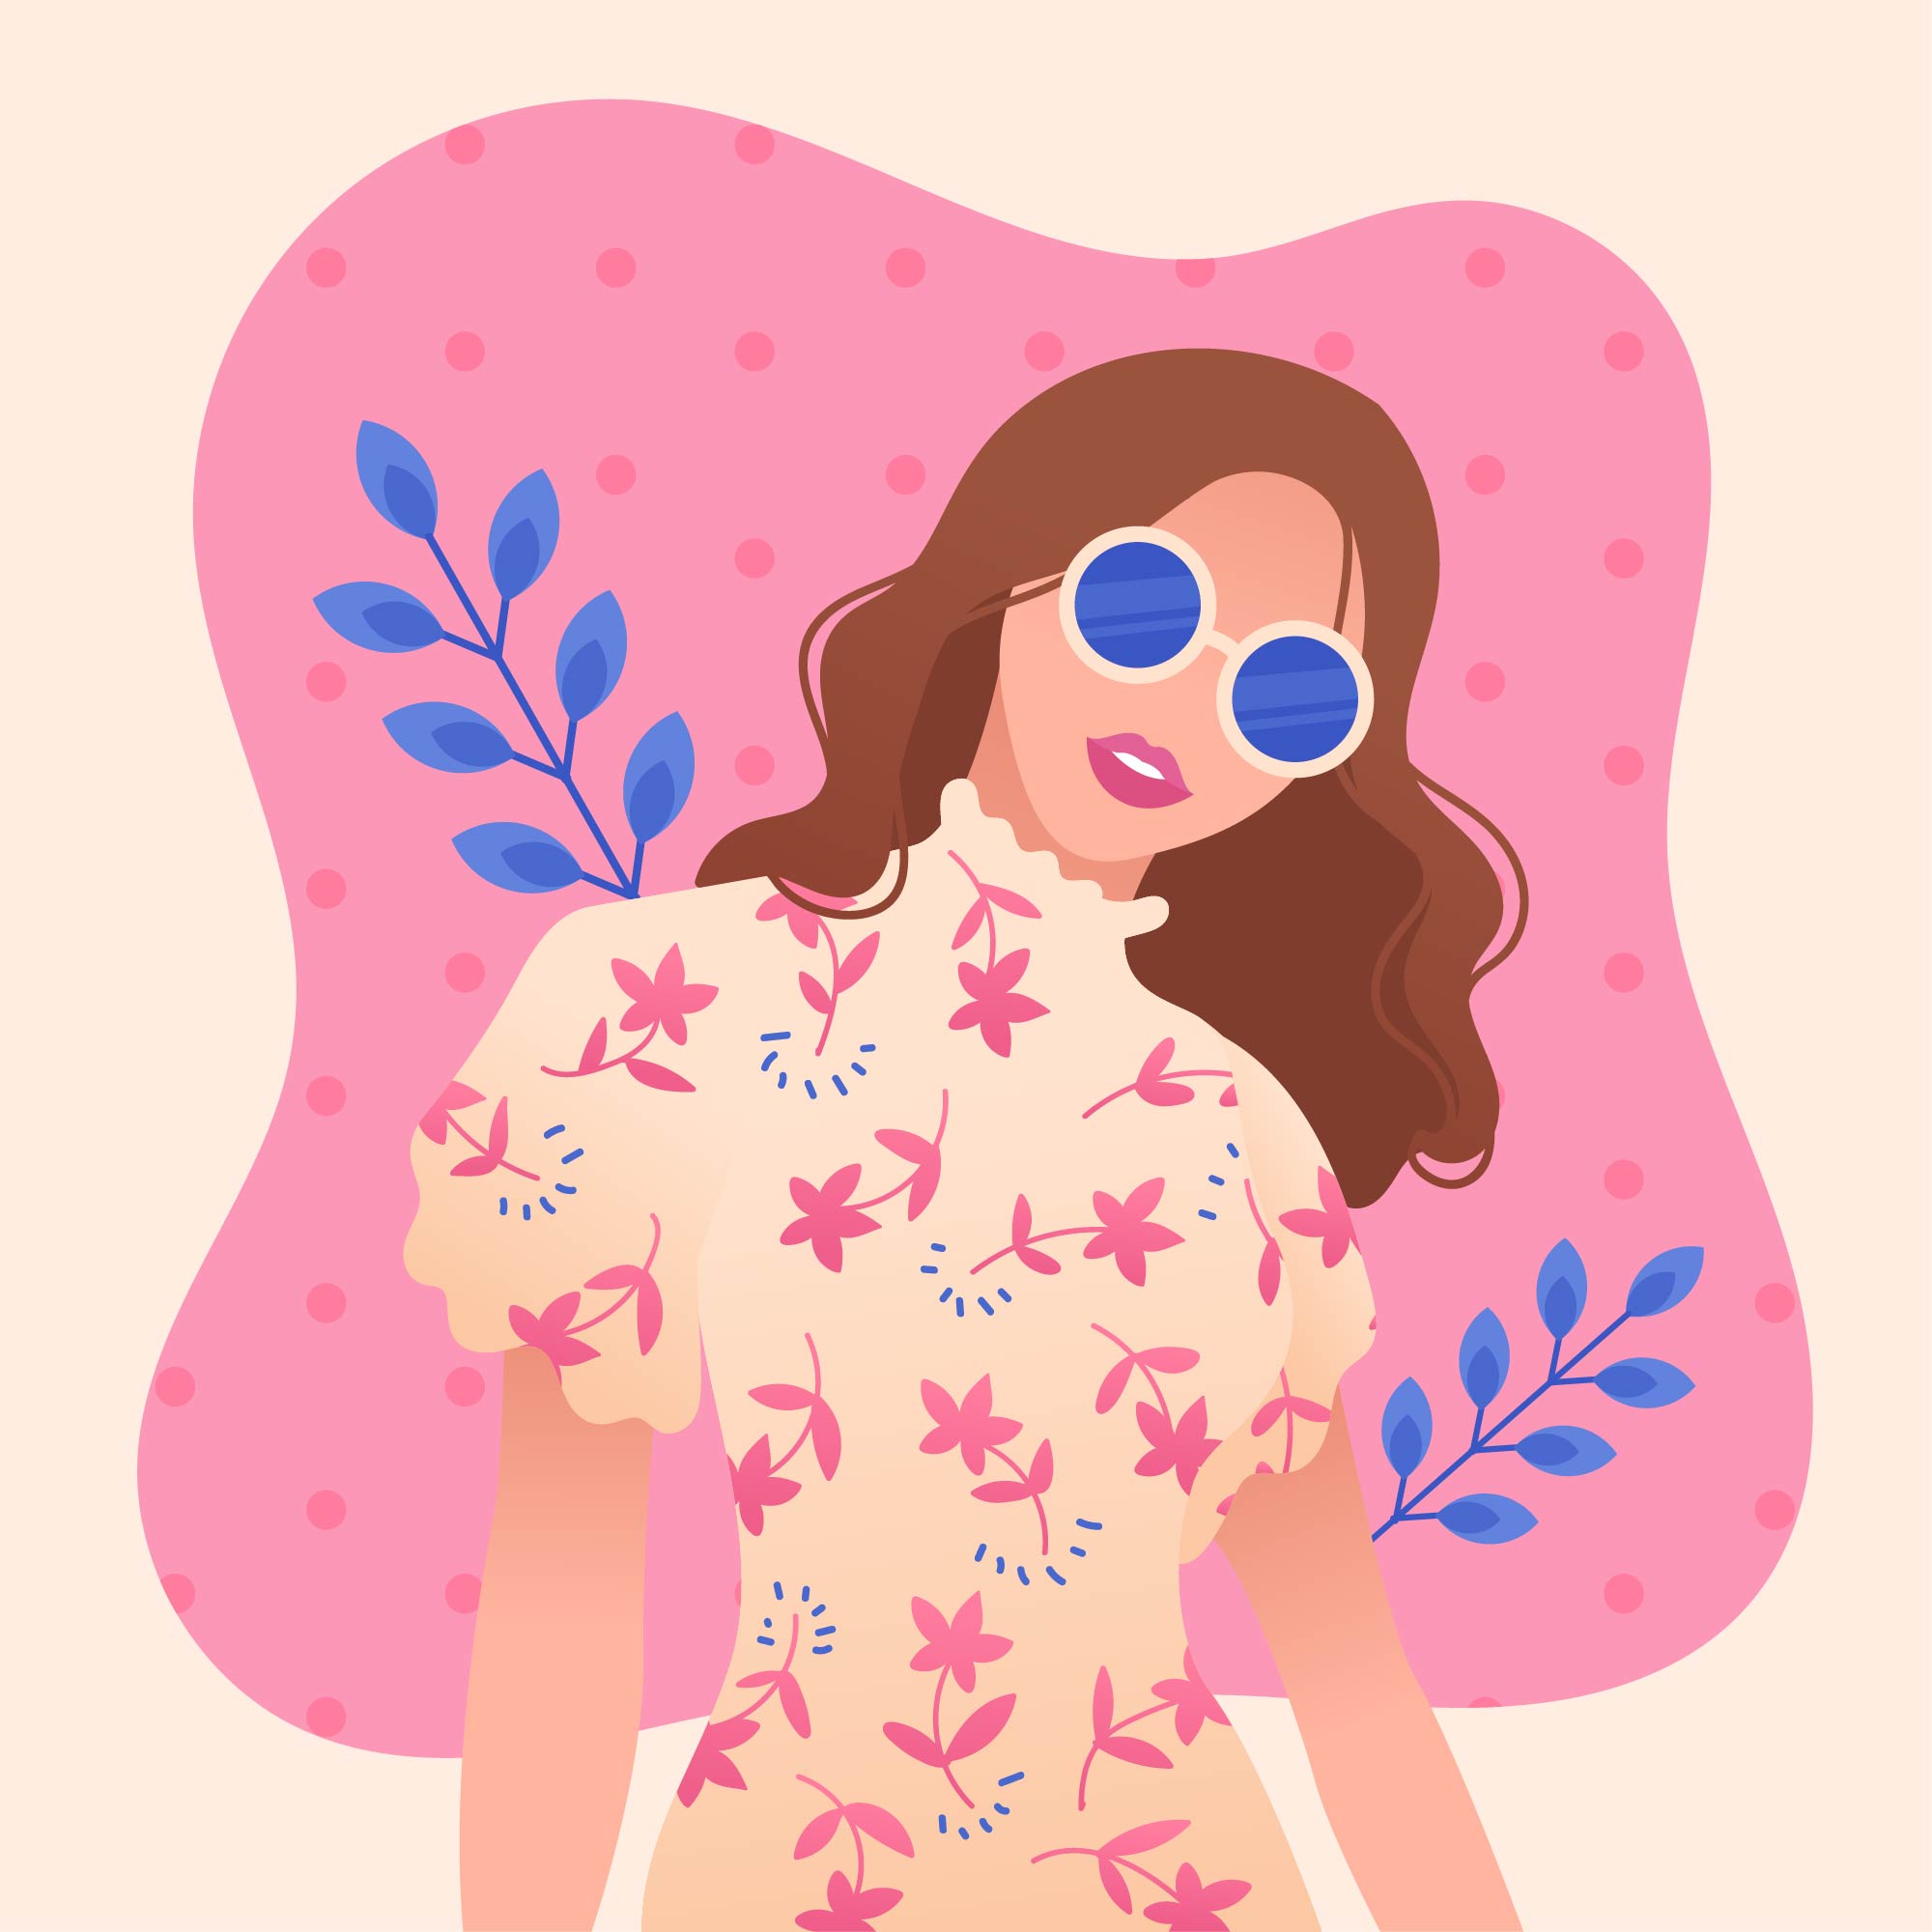 Download Girl with Wavy Hair and Glasses Vector 242373 Vector Art ...